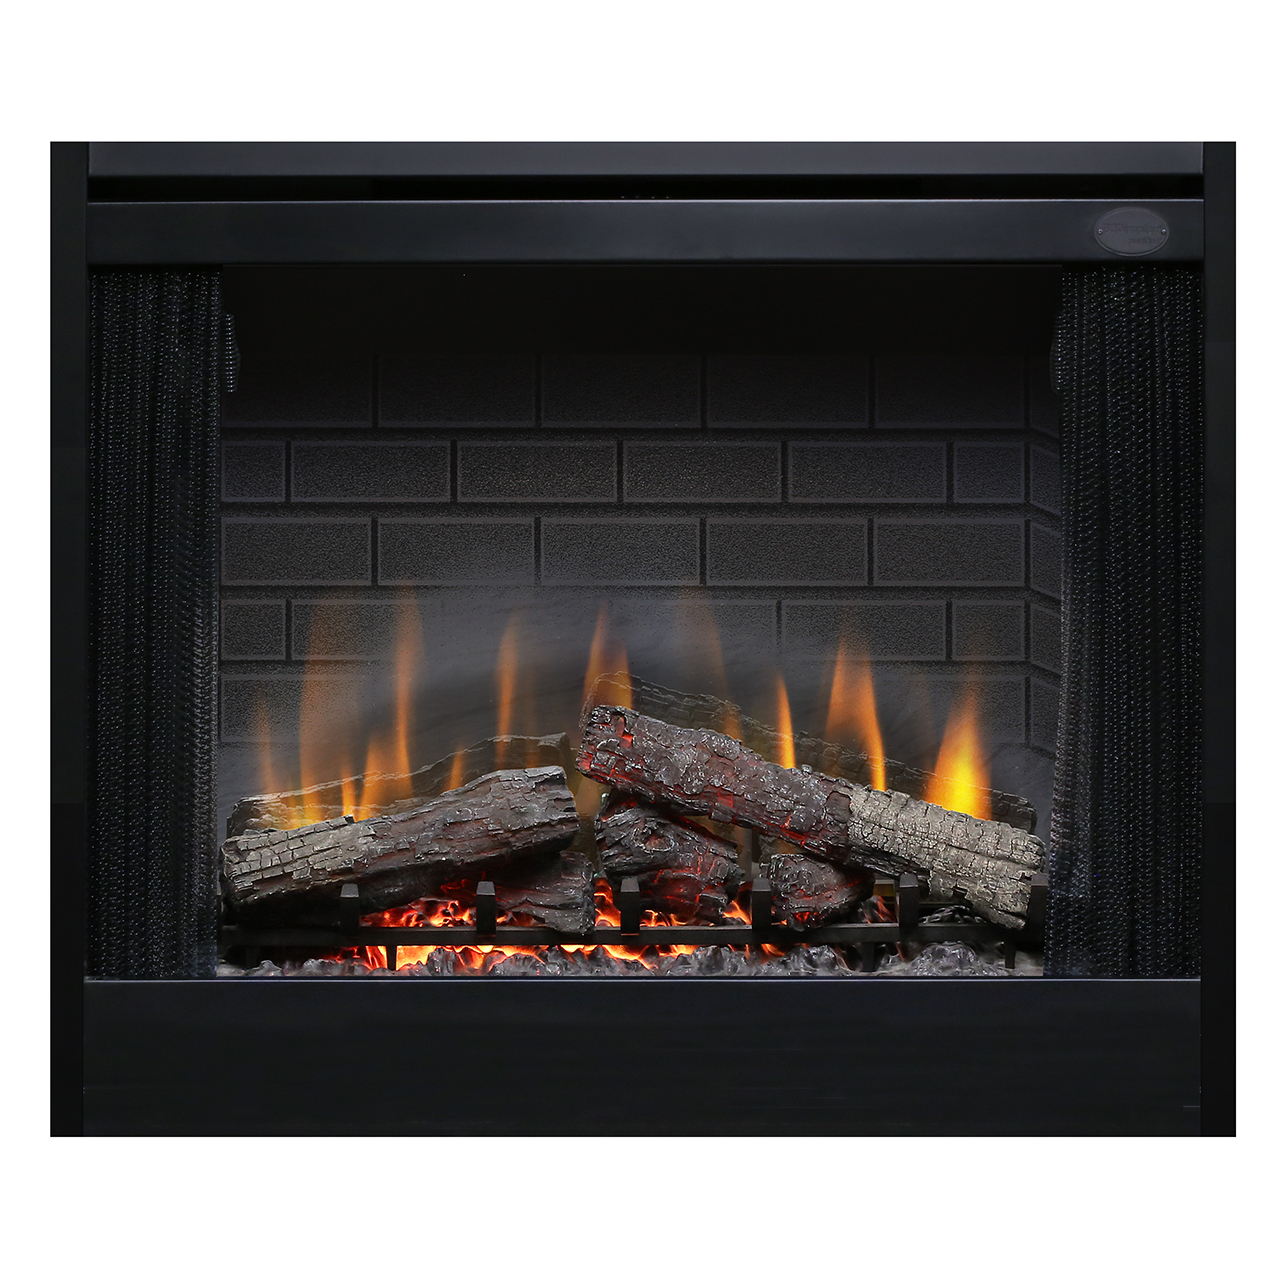 39 inch bf deluxe built-in electric firebox thumbnail image